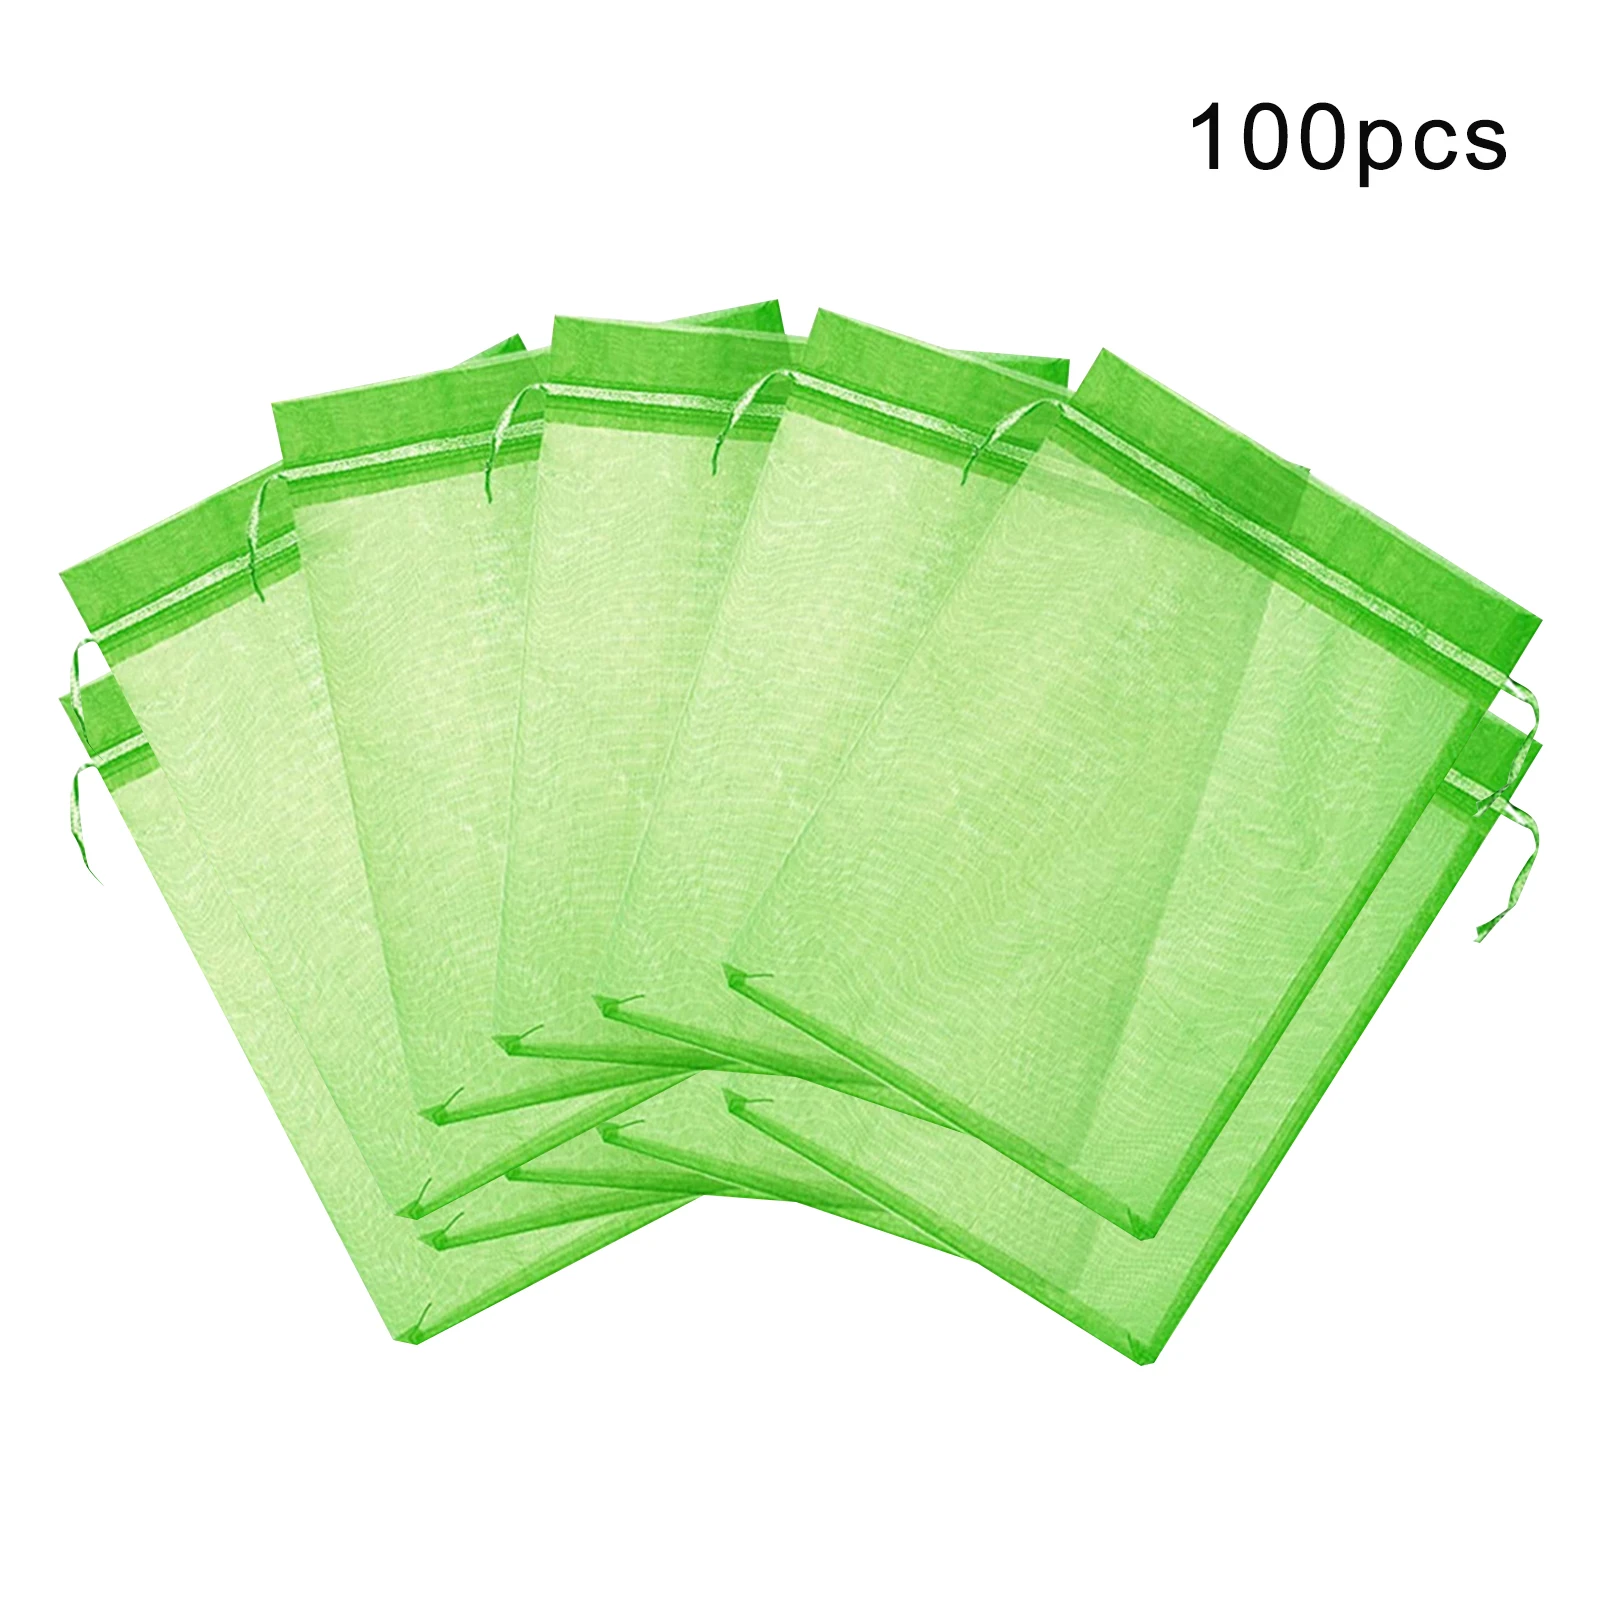 

100pcs Flower Fun Gift Fruit Protection Bags Reusable Easy To Use Against Birds Netting Barrier With Drawstring Protecting Plant